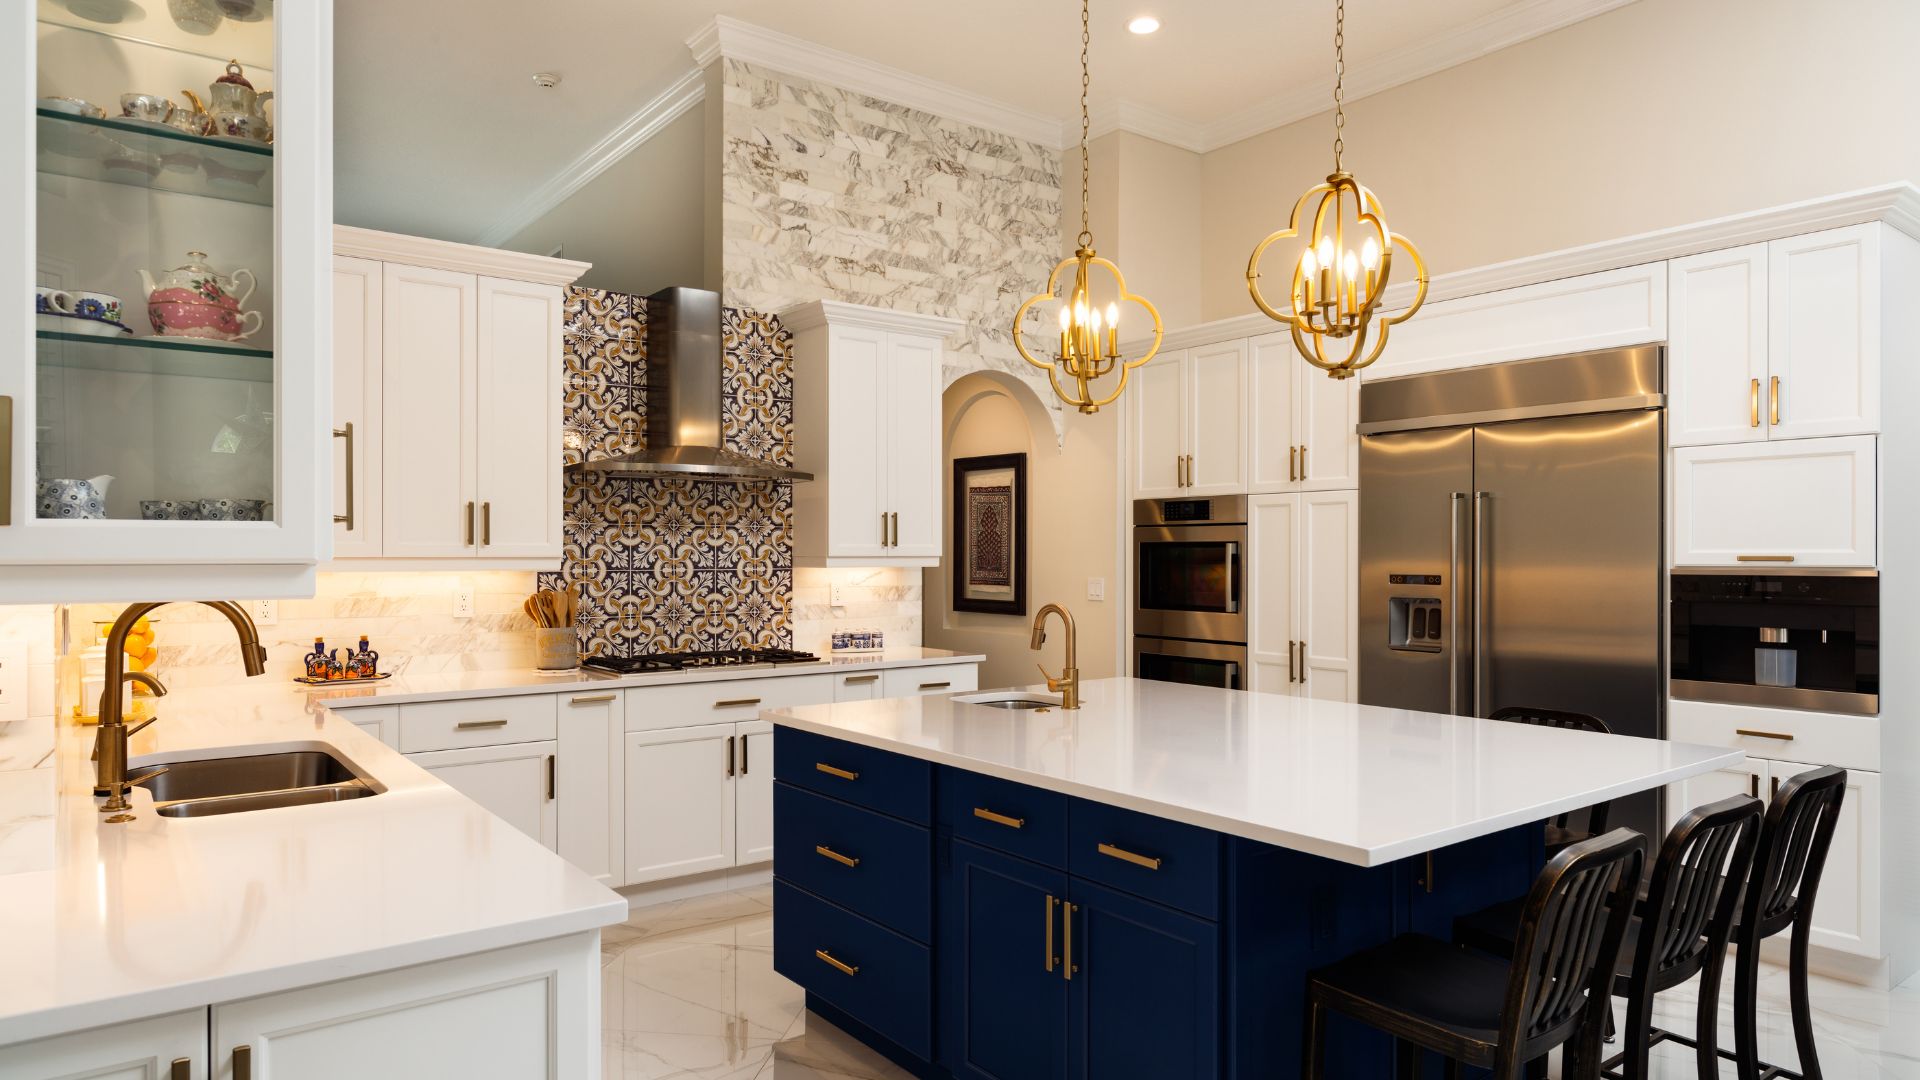 Kitchen and Bathroom Remodeling in Herndon Virginia